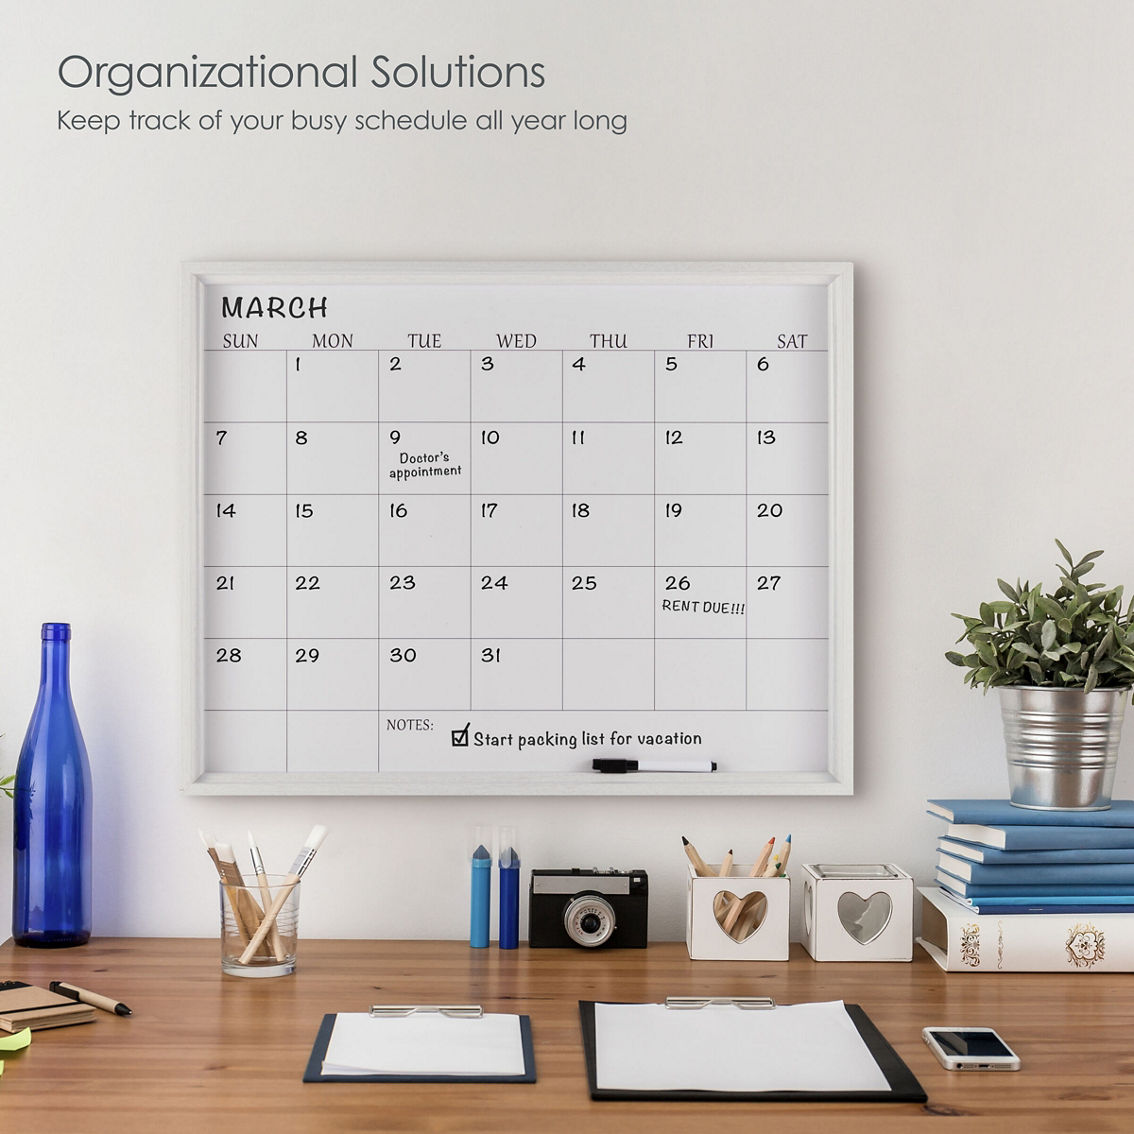 Towle Living 24 x 19 in. Whiteboard Calendar with Dry Erase Pen - Image 3 of 5